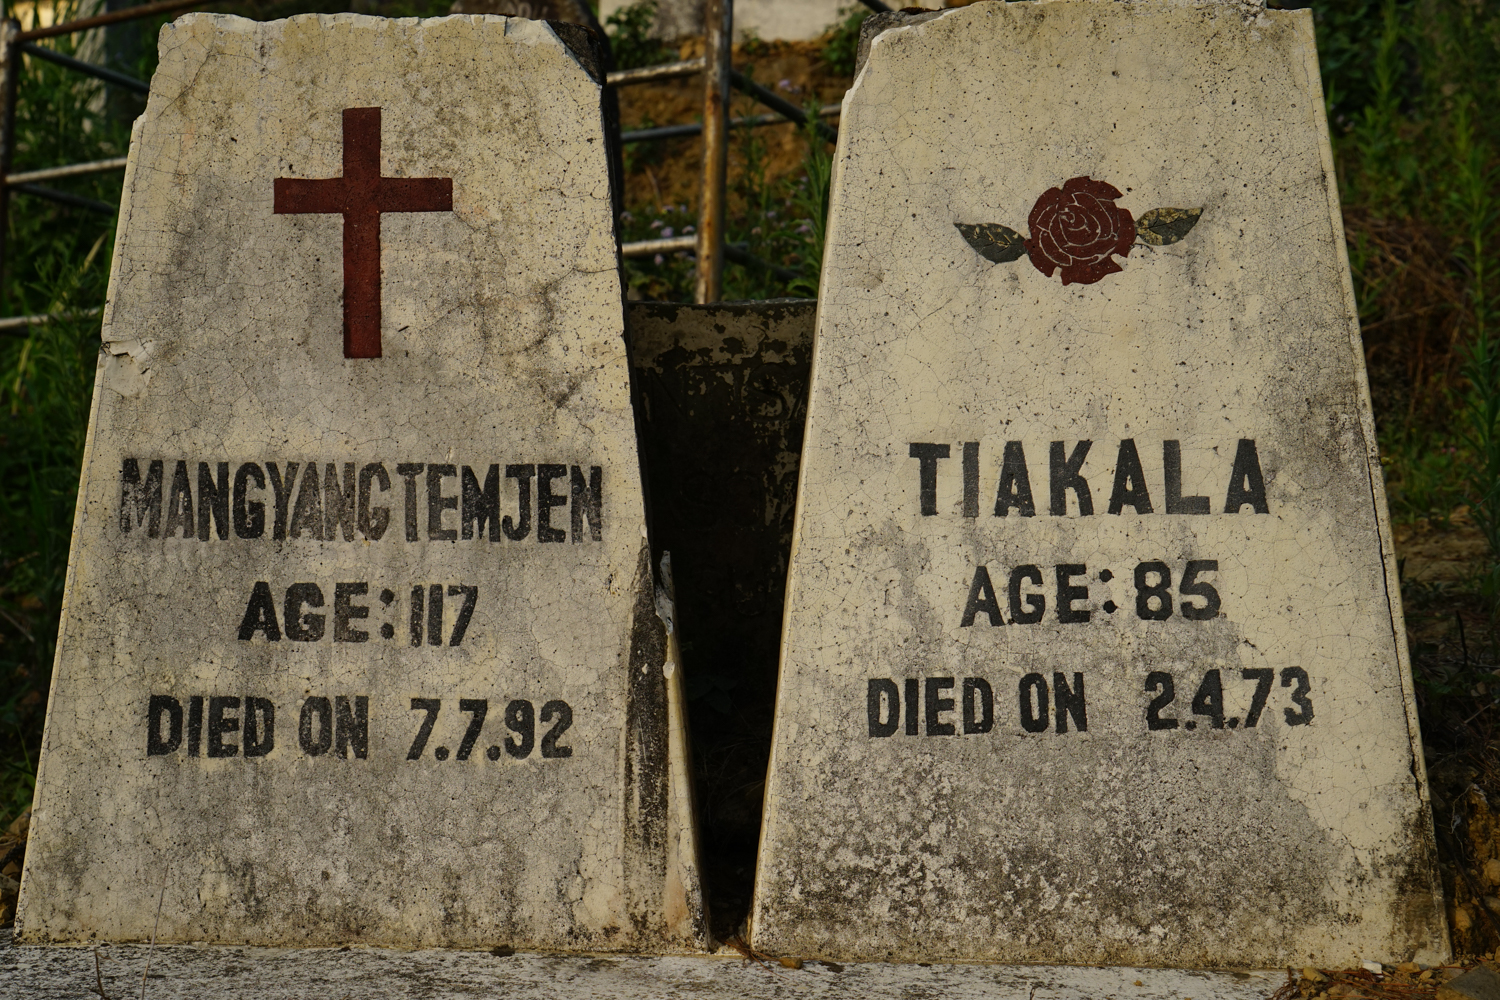 Cemetery in Nagaland